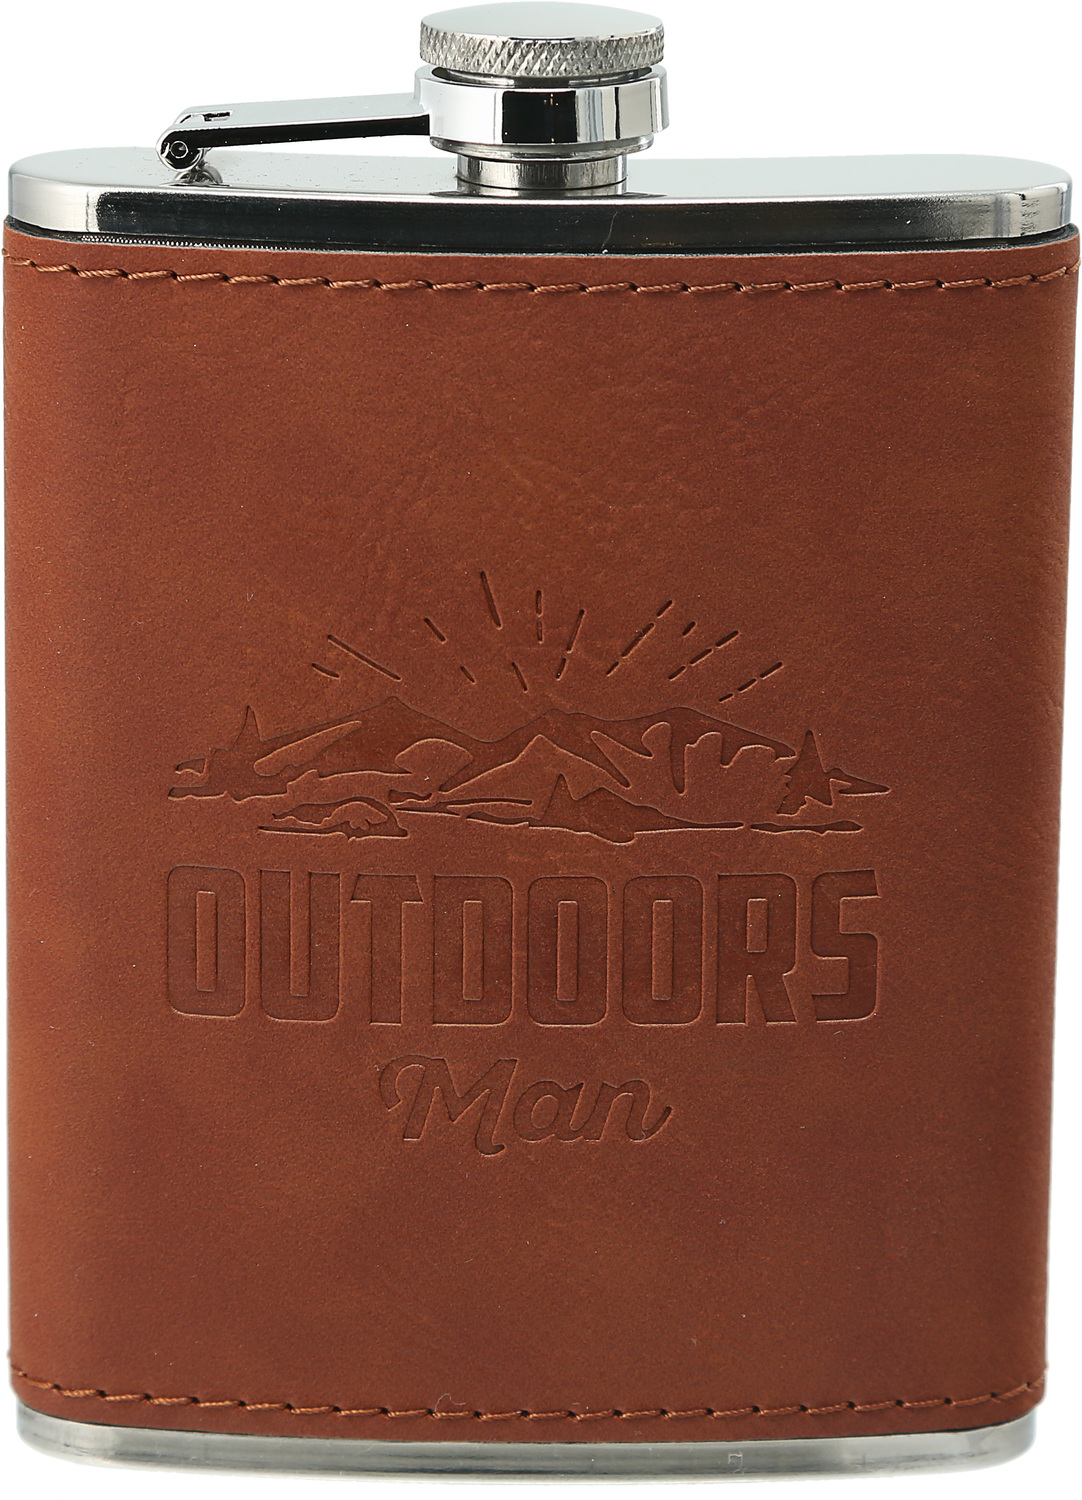 Outdoors Man by Man Out - Outdoors Man - PU Leather & Stainless Steel 8 oz Flask